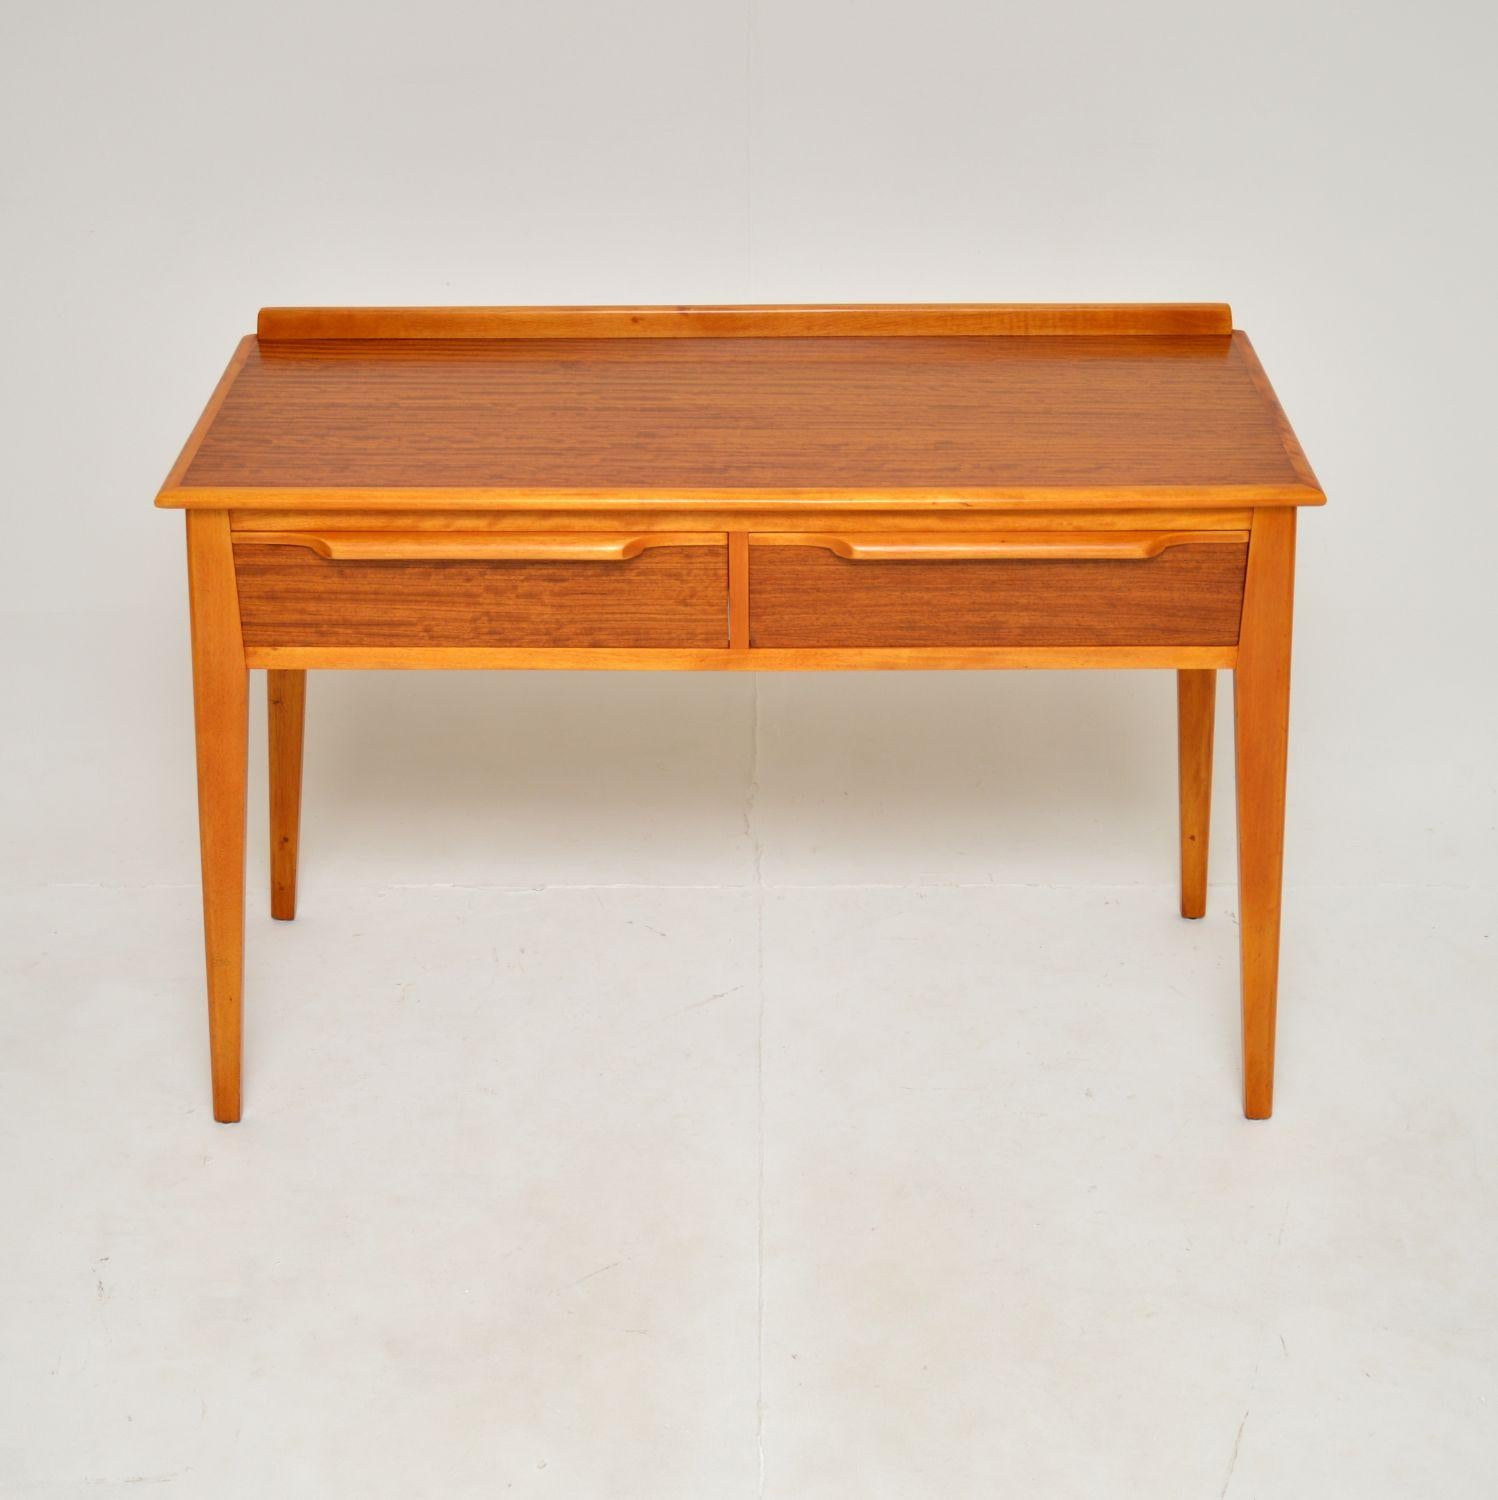 An extremely stylish and well made vintage walnut console table by Finewood. This was made in England, it dates from around the 1950-60’s.

It is of excellent quality and is beautifully designed. Furniture by the manufacturer Finewood is quite rare